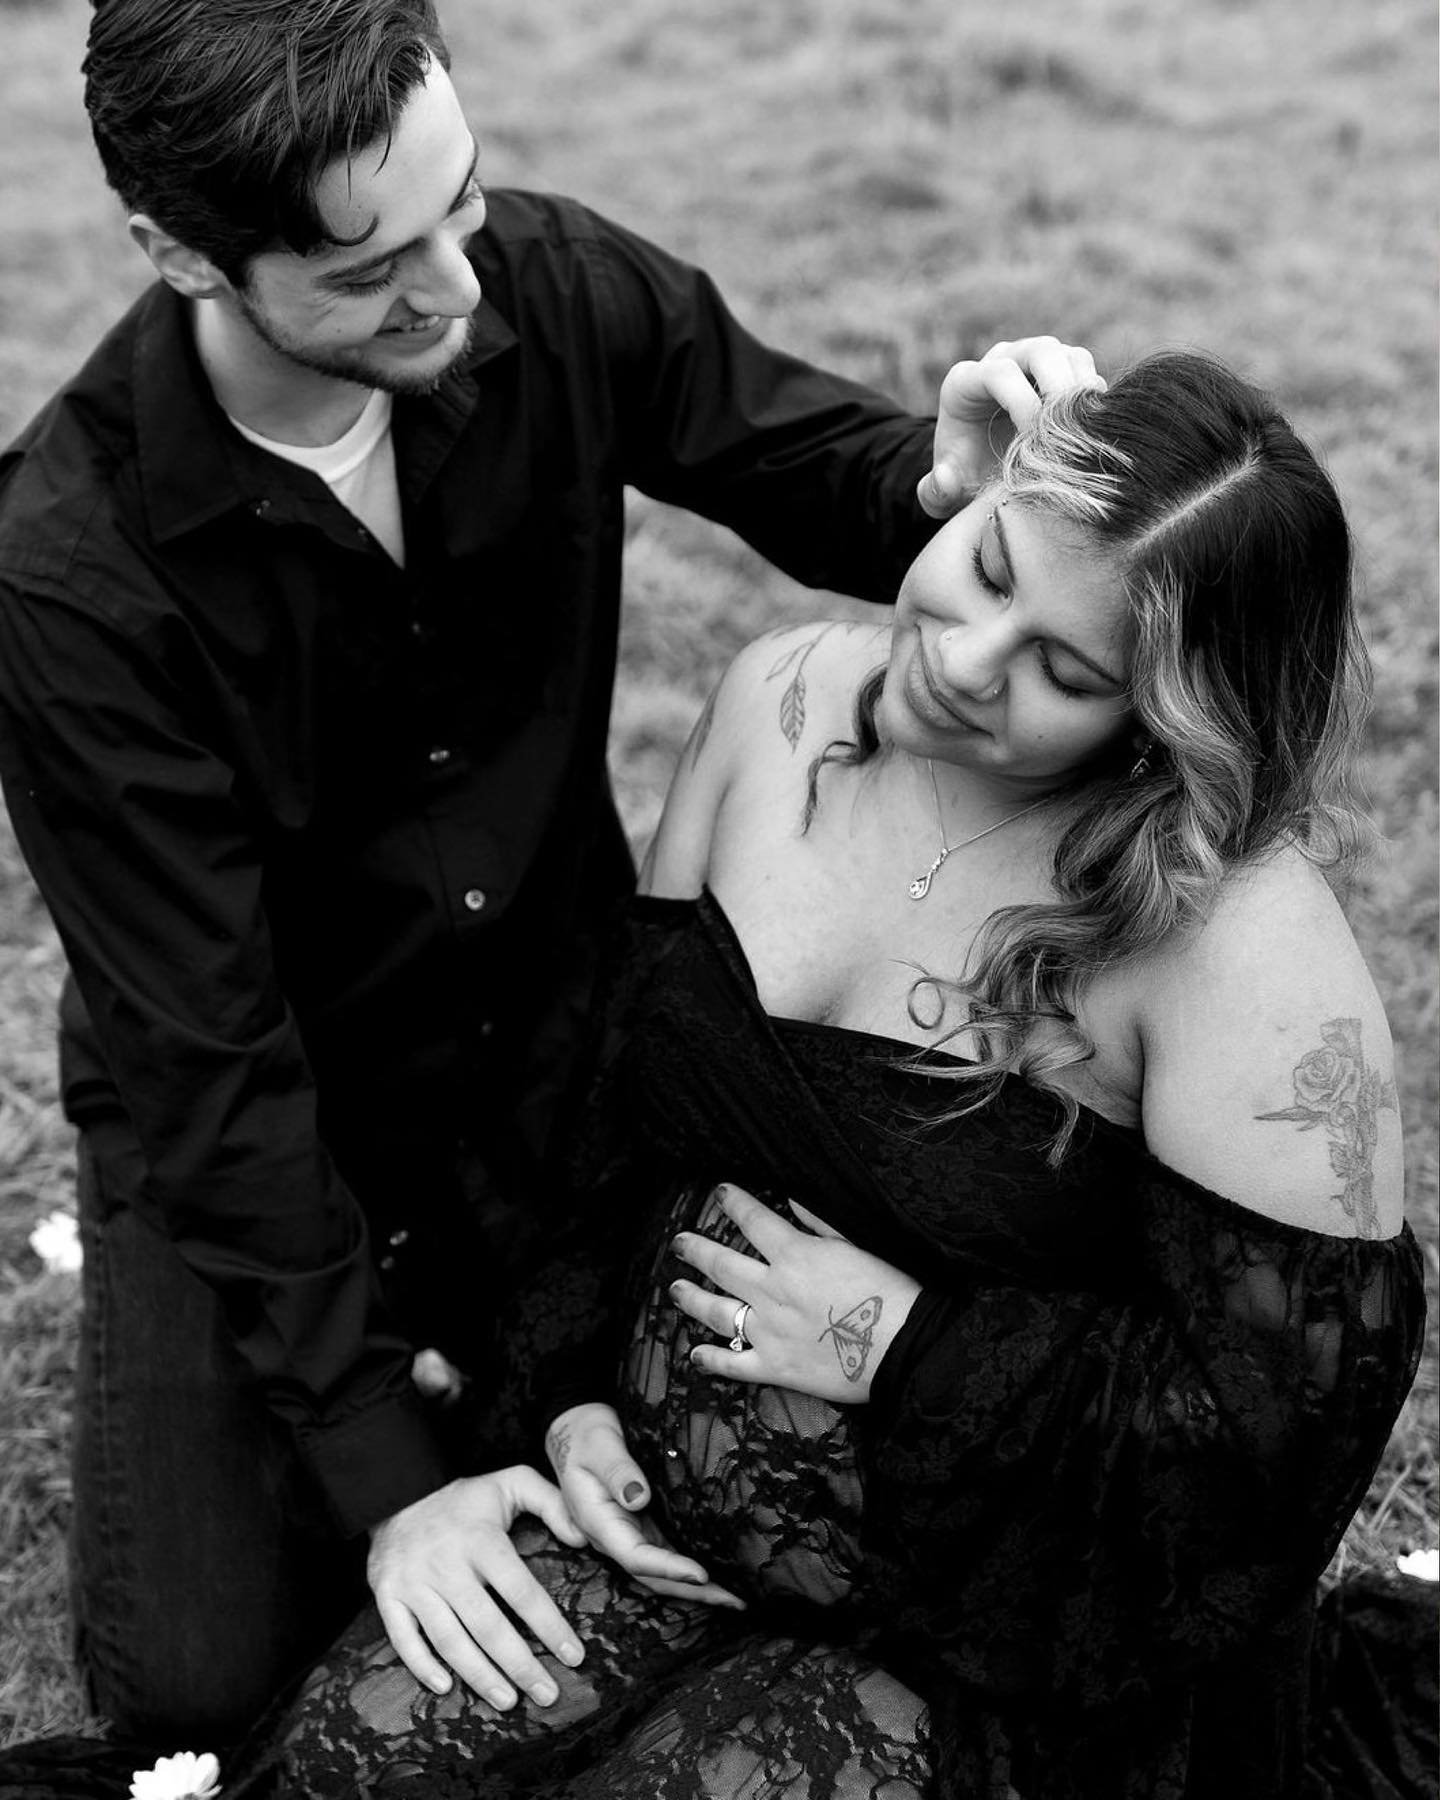 Maternitys for Ileana &amp; Ethan&mdash;Baby Olsen doesn&rsquo;t have a clue he&rsquo;s already got the best parents ever 🖤🪐🌿🌼

-

Maternity photos. Washington Photographer. Maternity session. Maternity photographer. Seattle photographer. Pregnan